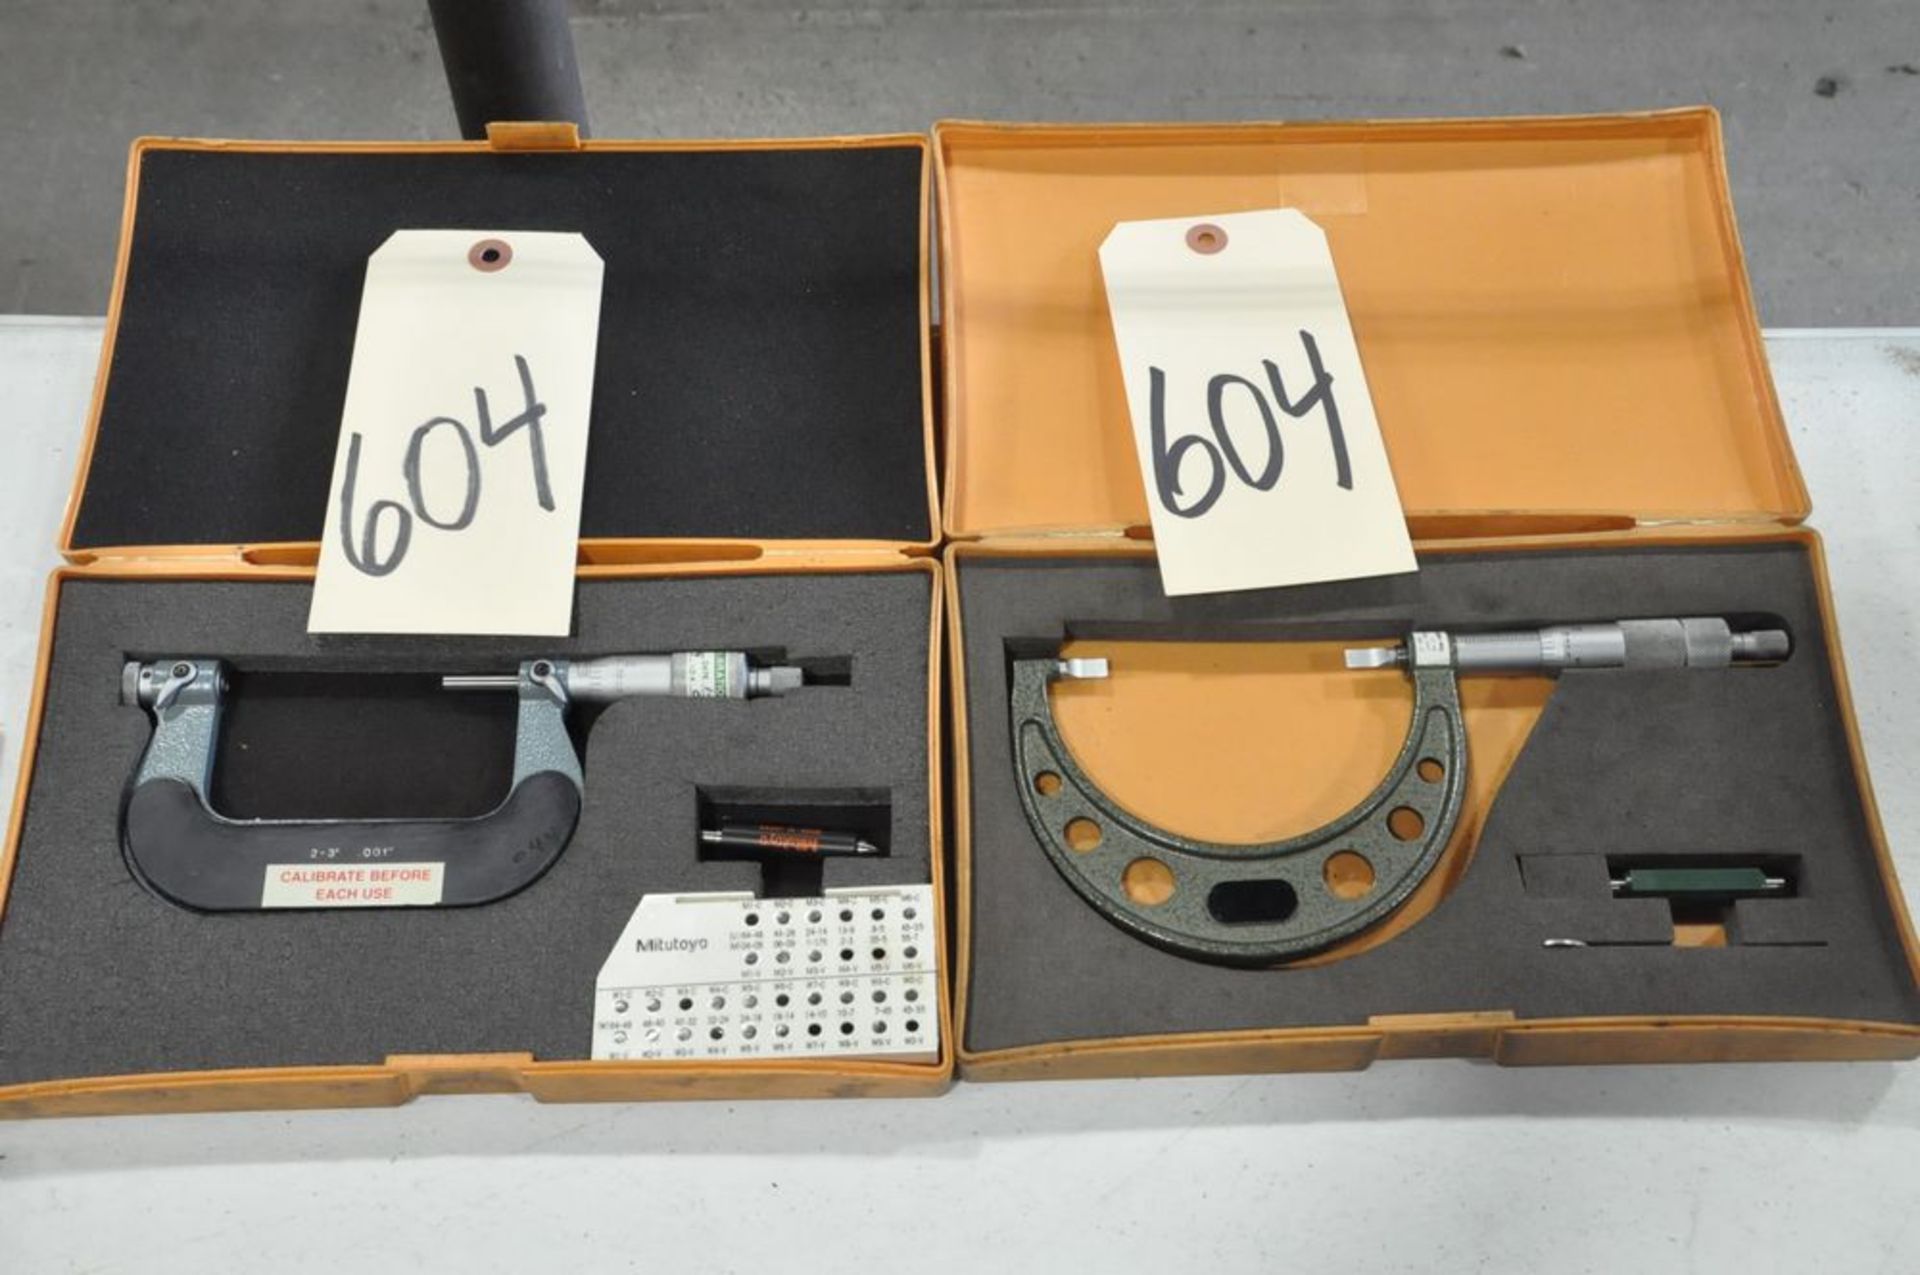 Lot-(2) Asst'd Micrometers with Cases